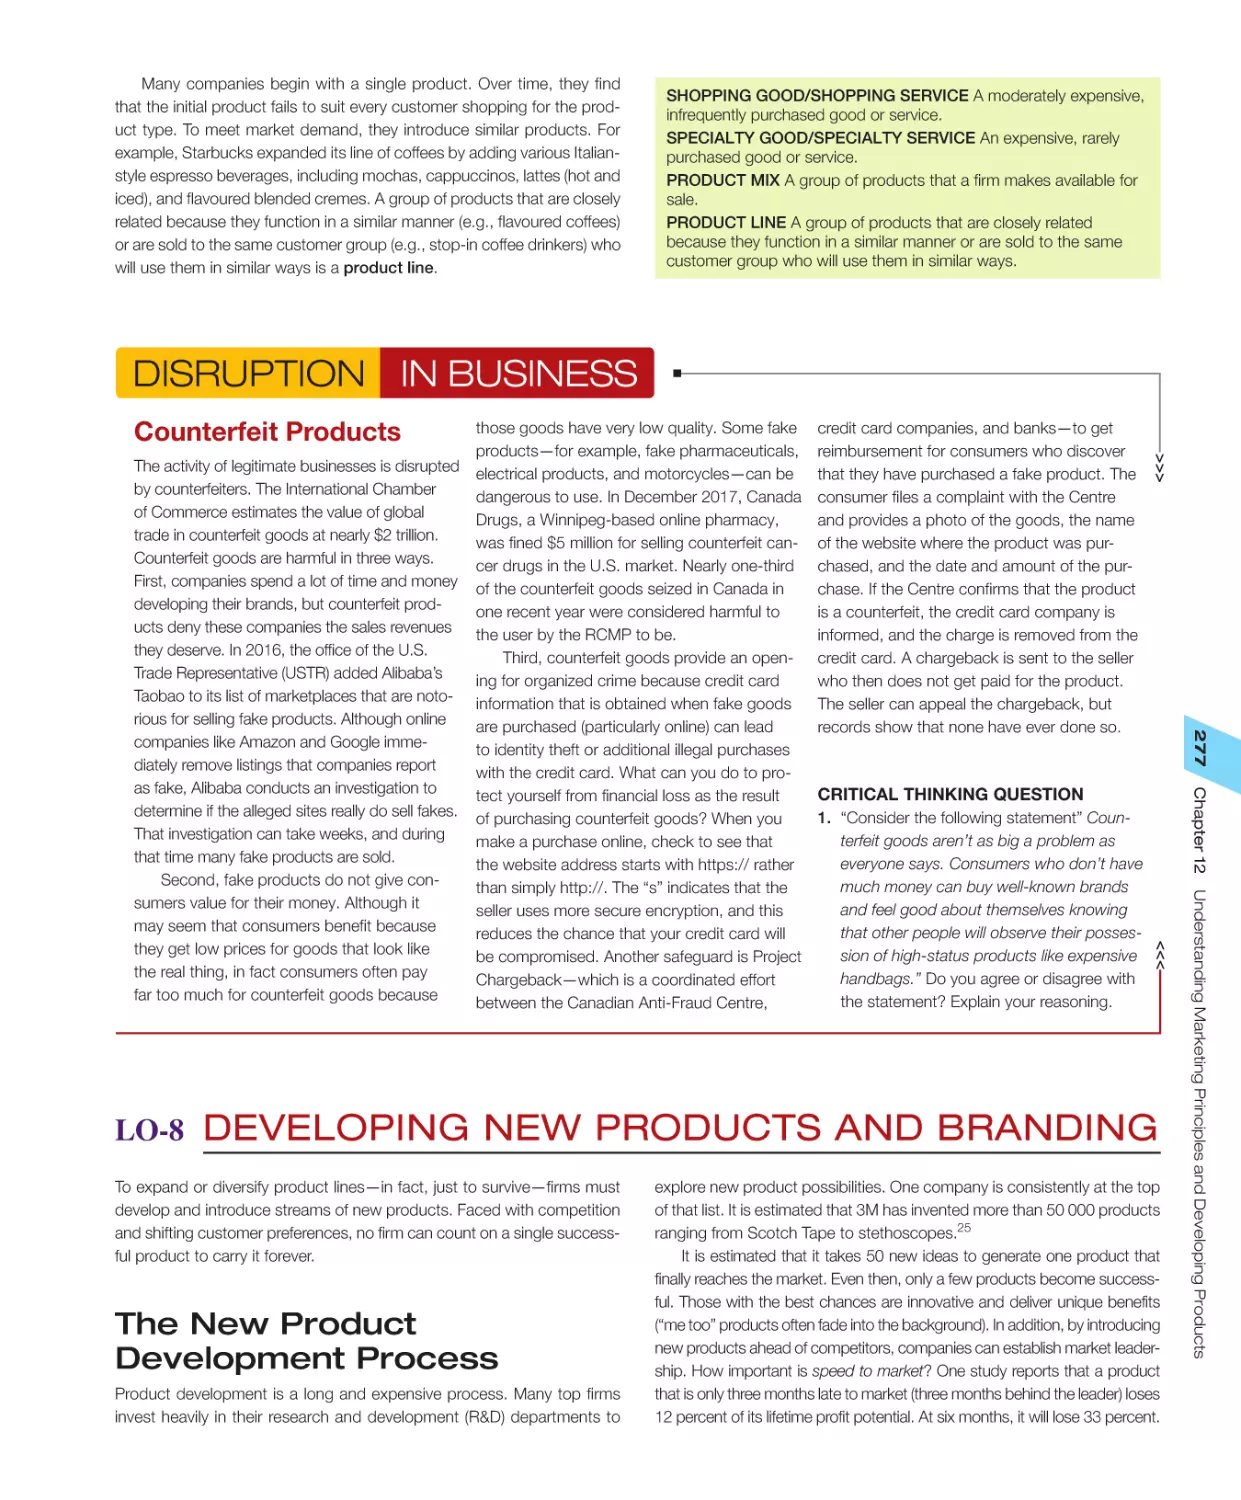 DISRUPTIONS IN BUSINESS Counterfeit Products
LO‐8 Developing New Products and Branding